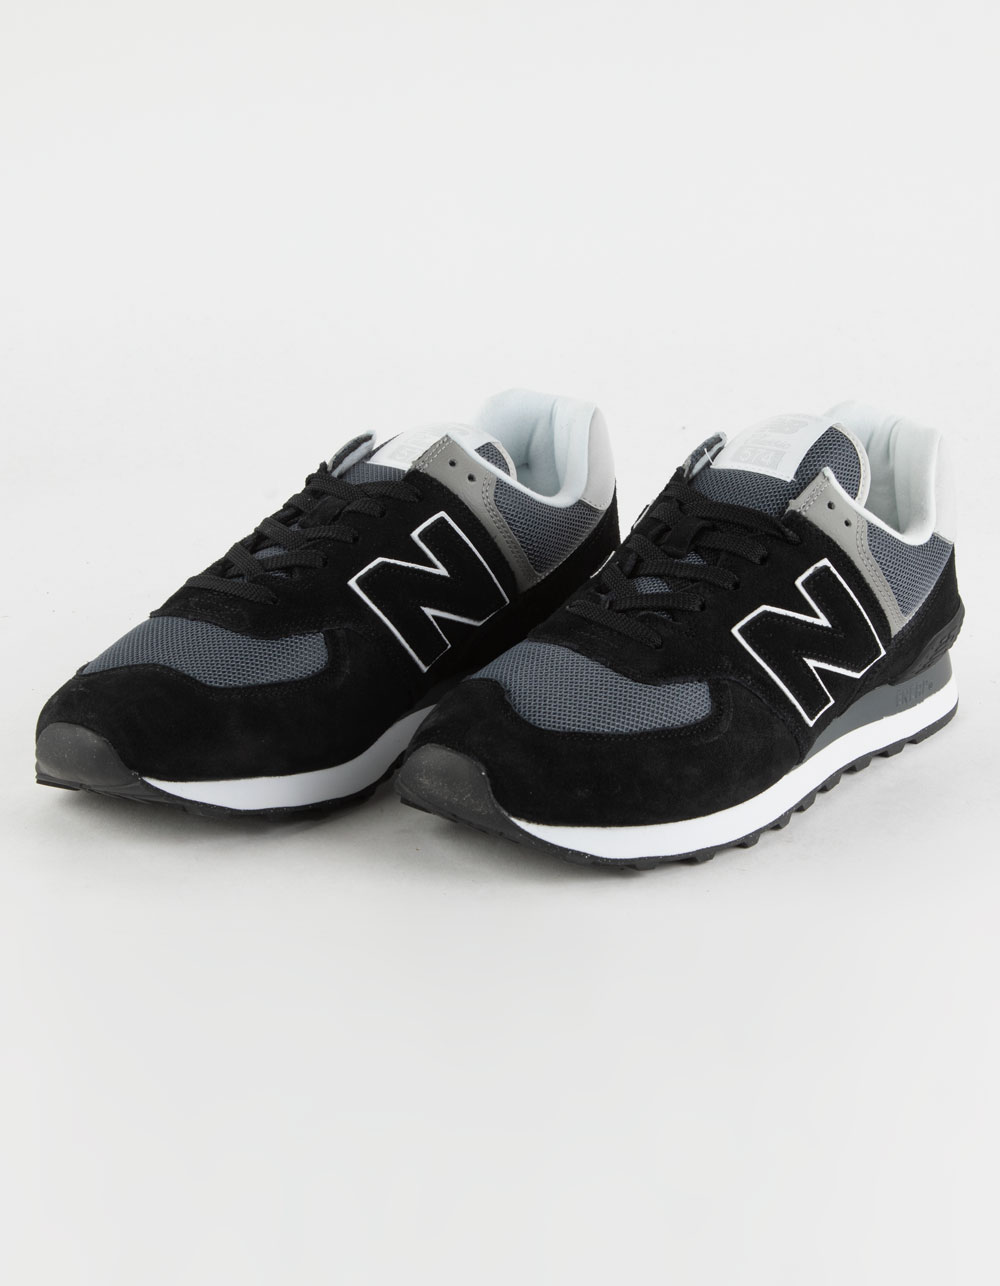 NEW BALANCE Mens Shoes - BLK/GRY Tillys